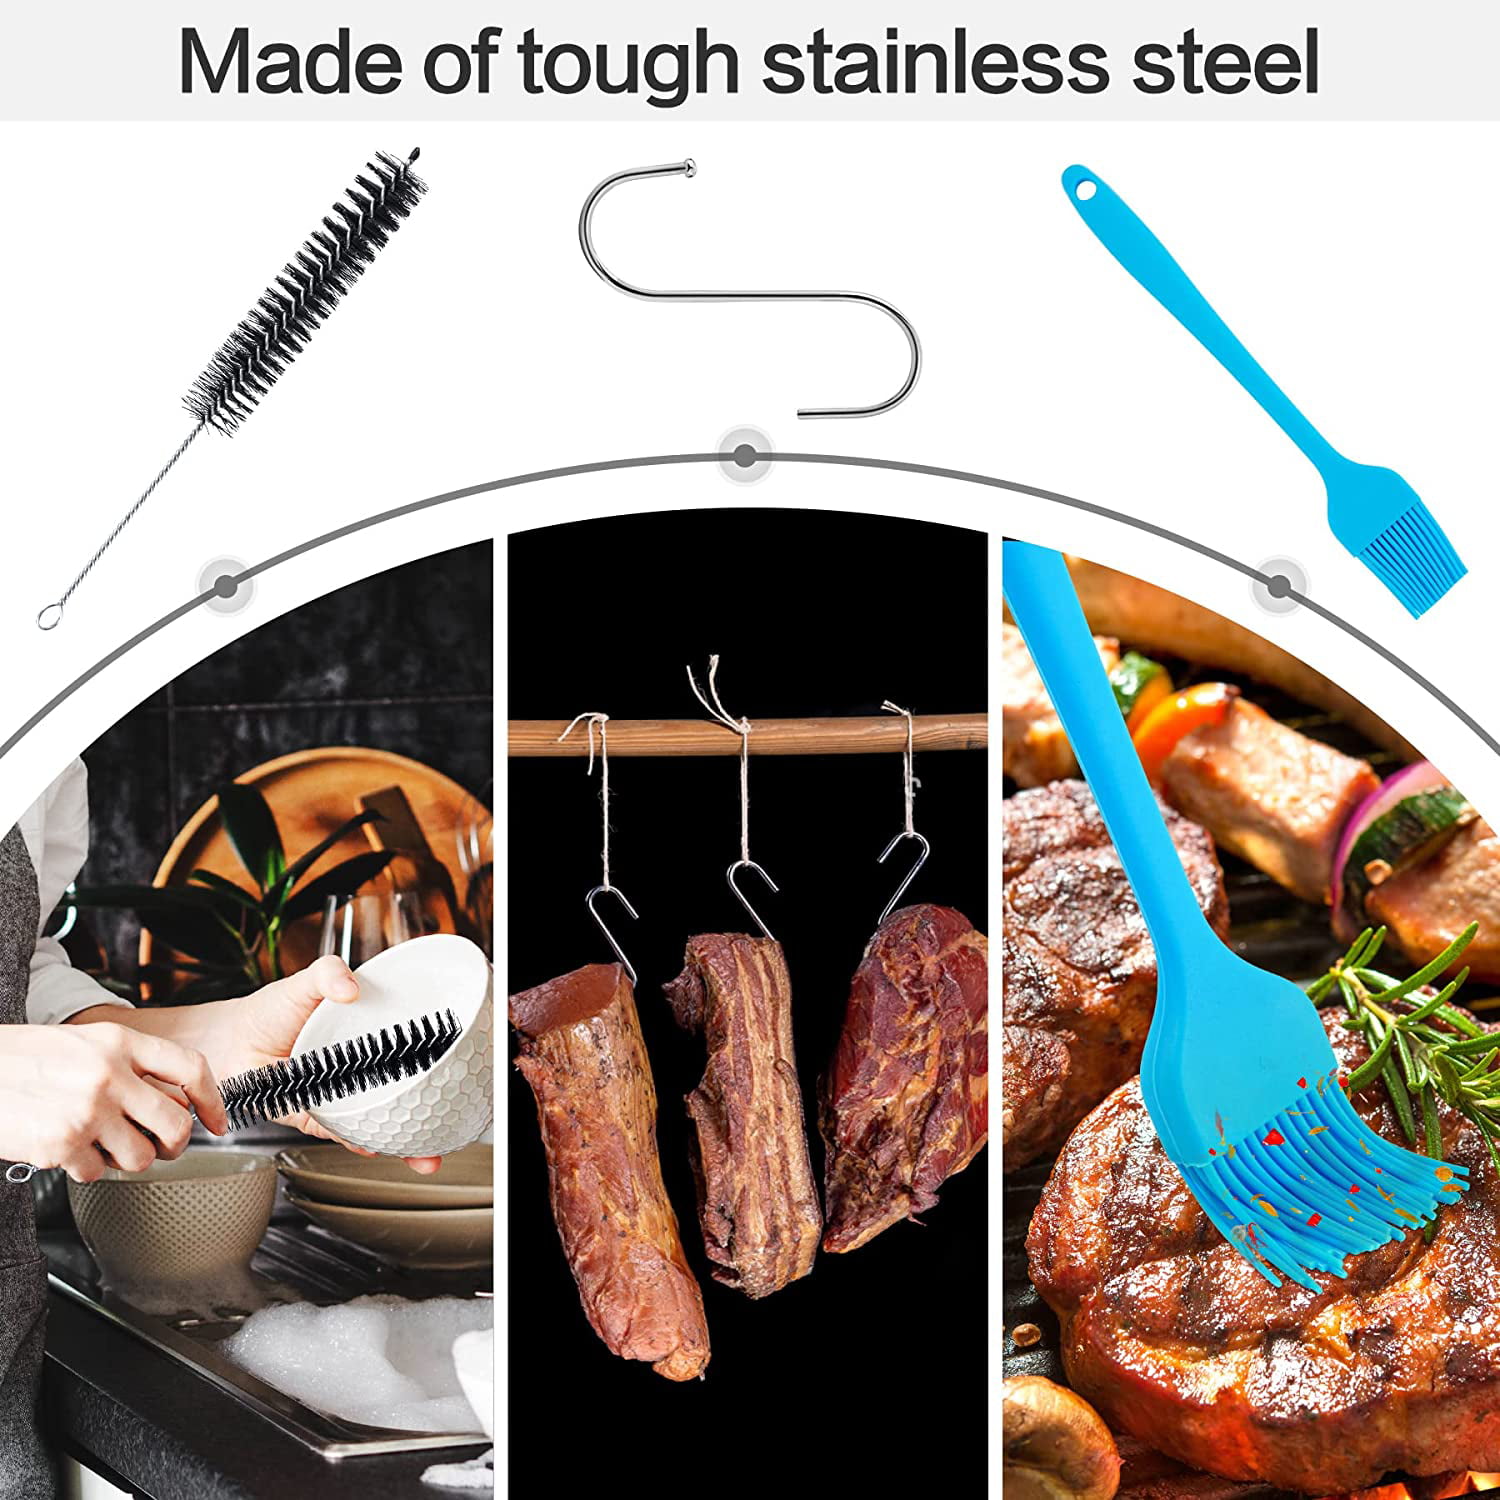 Stainless Steel BBQ Smoker - High Grade 304 Stainless Steel 8+ Hours Hot or Cold Smoking Generator for Cheese Fish or Meat on BBQ Grill - Barbecue